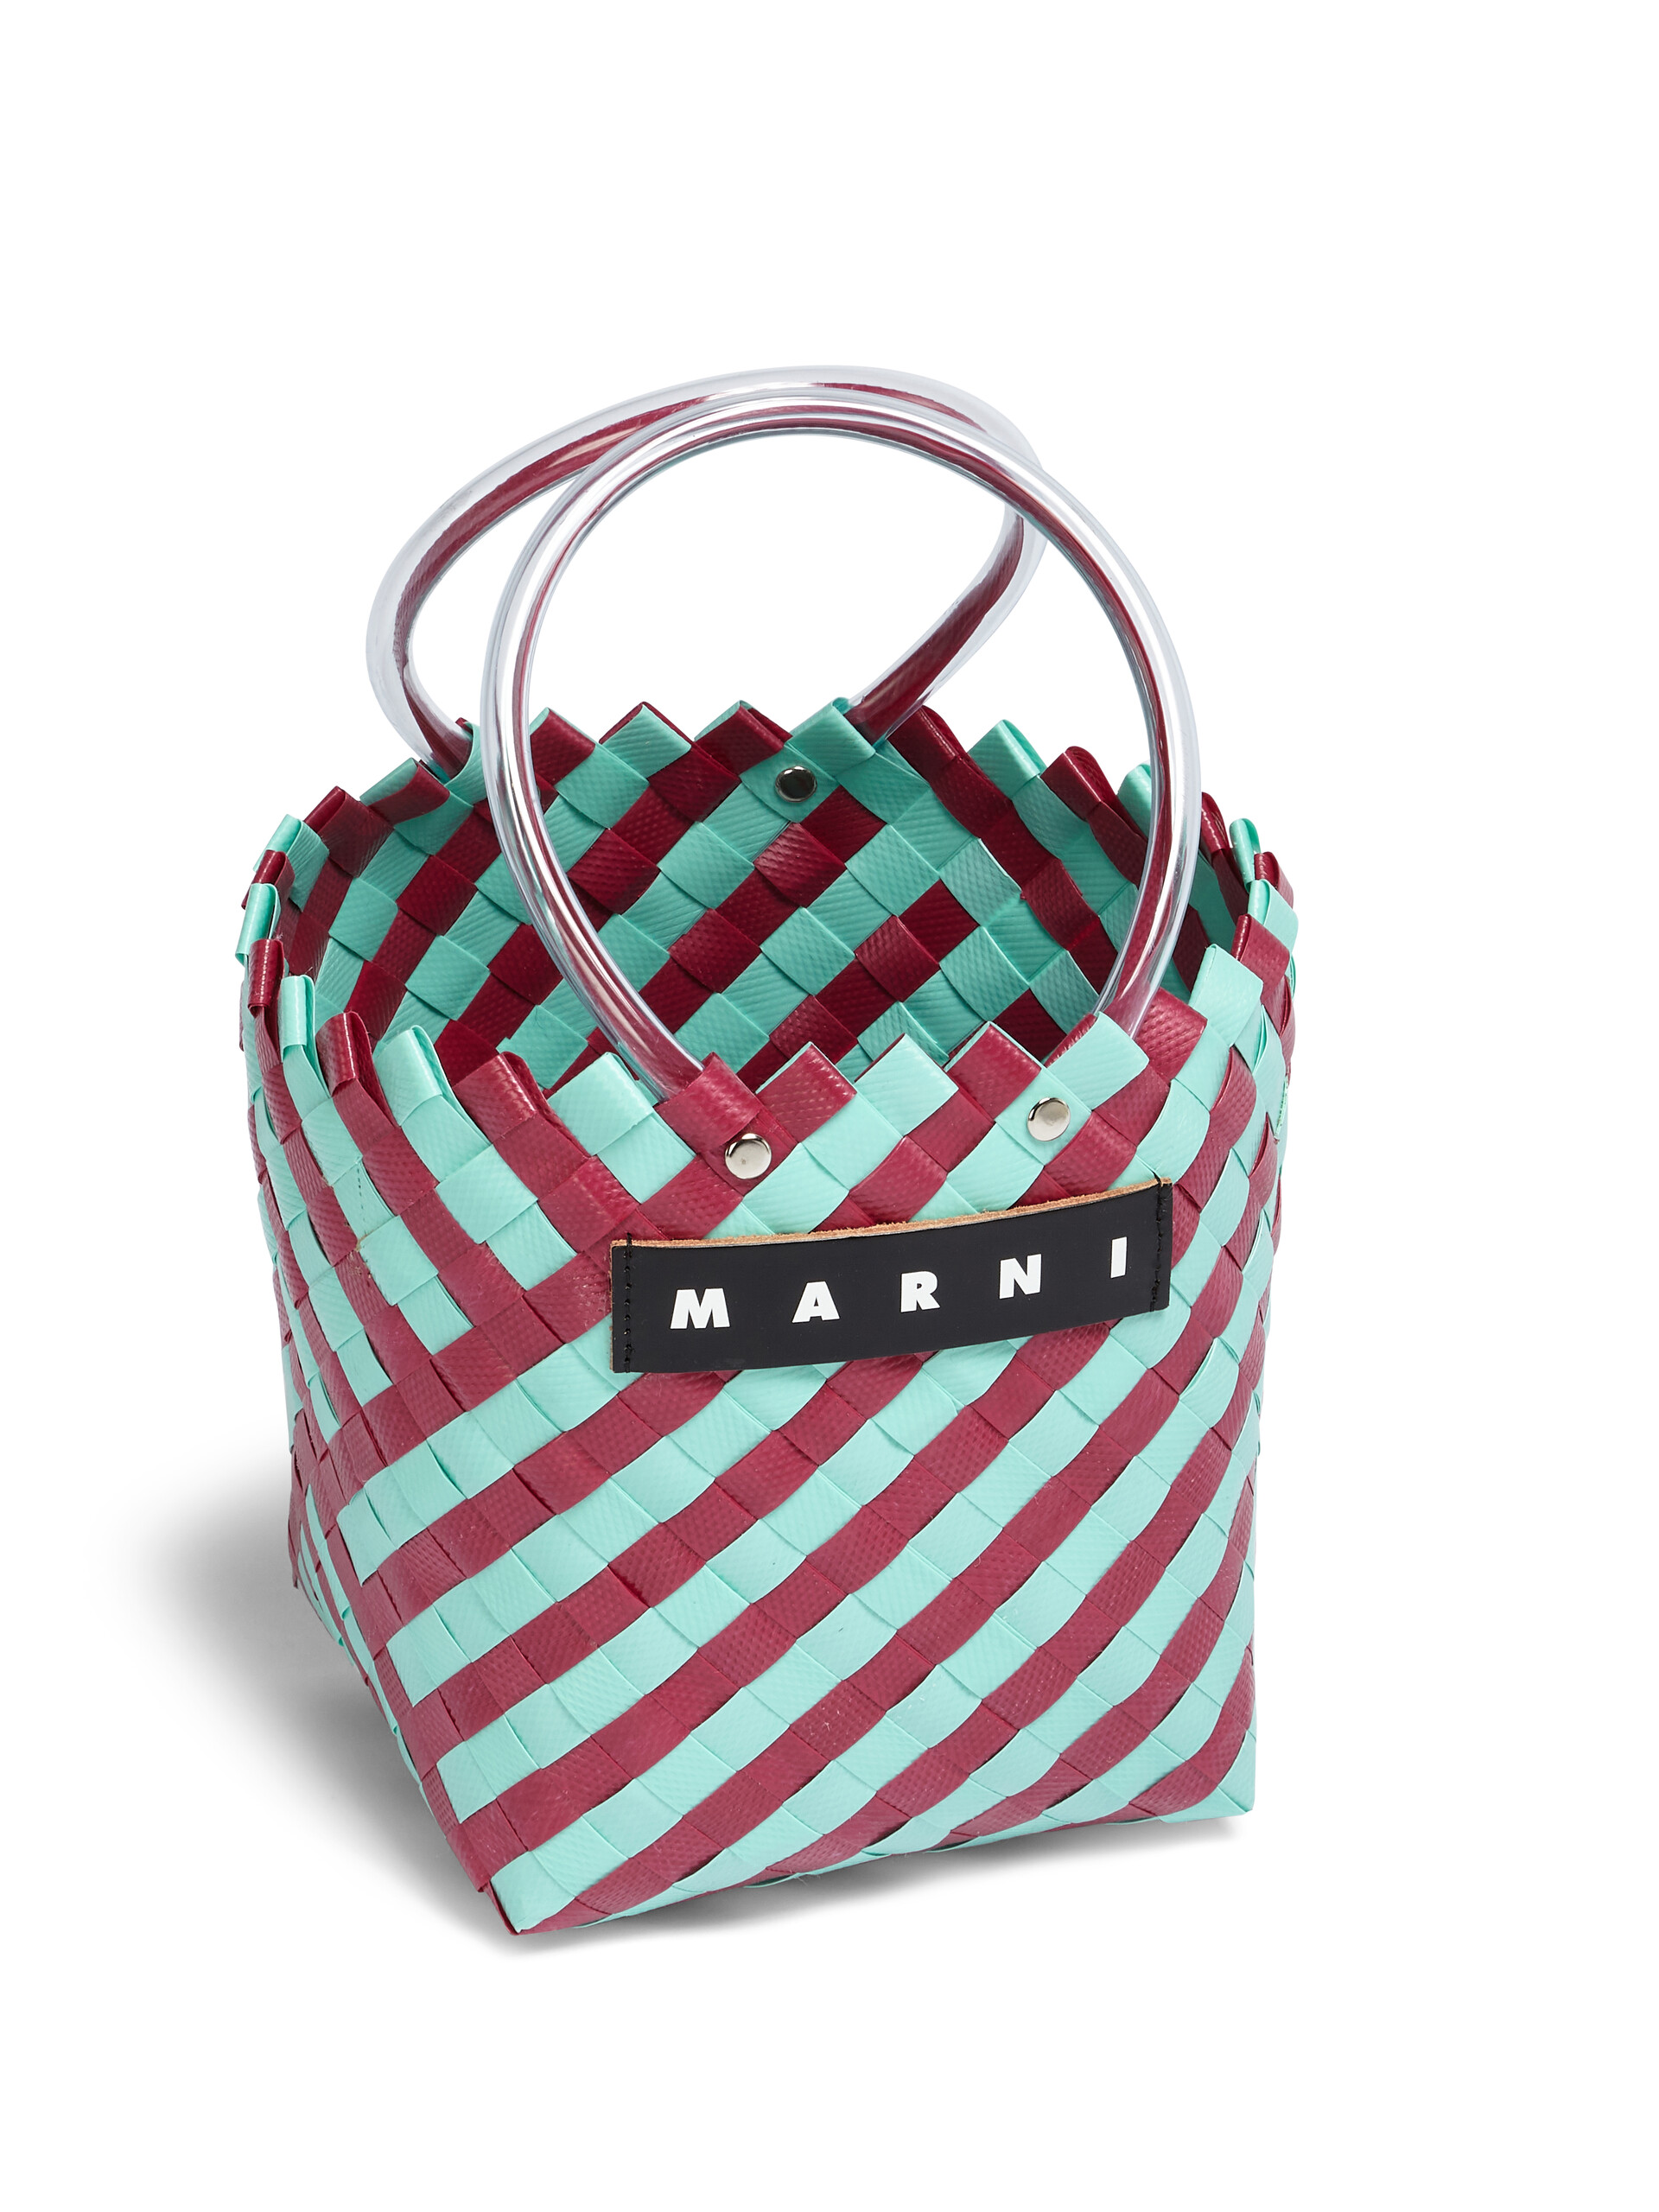 MARNI MARKET TAHA bag in green and burgundy woven material - Shopping Bags - Image 4